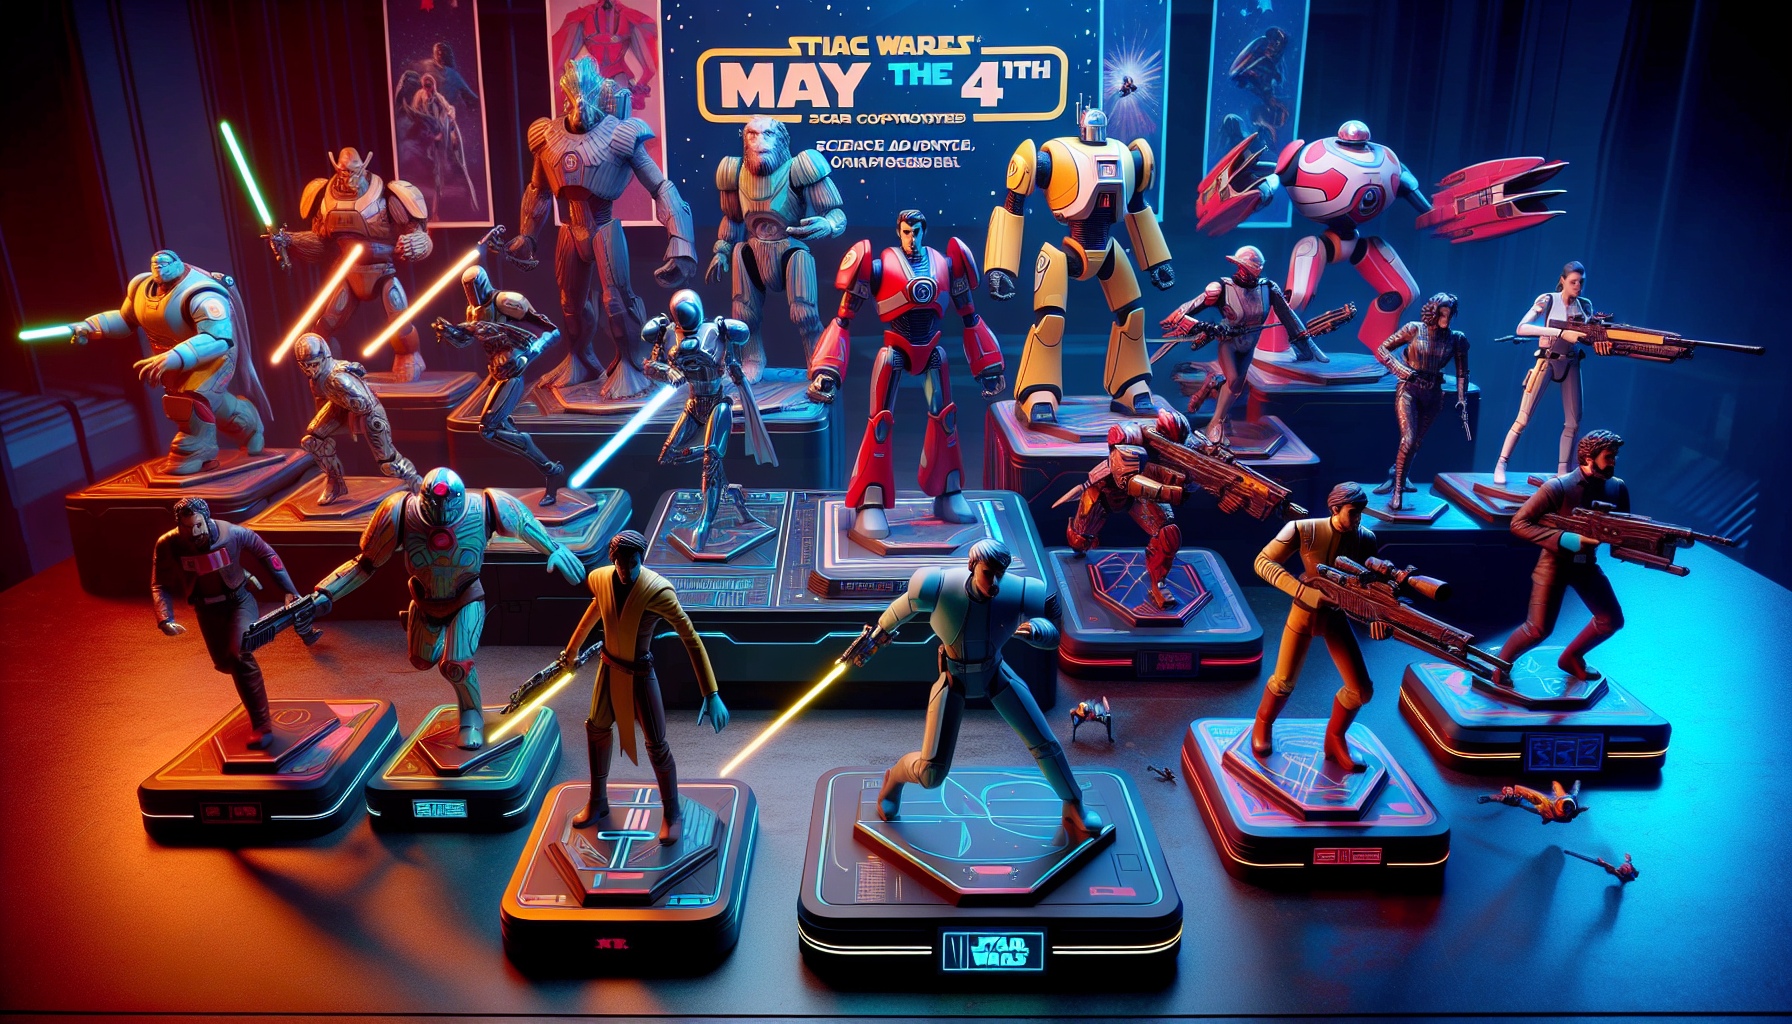 An array of ten detailed Hot Toys figures from the Star Wars universe displayed on a sleek, futuristic table with a May the 4th celebratory banner in the background, each figure positioned in a dynami